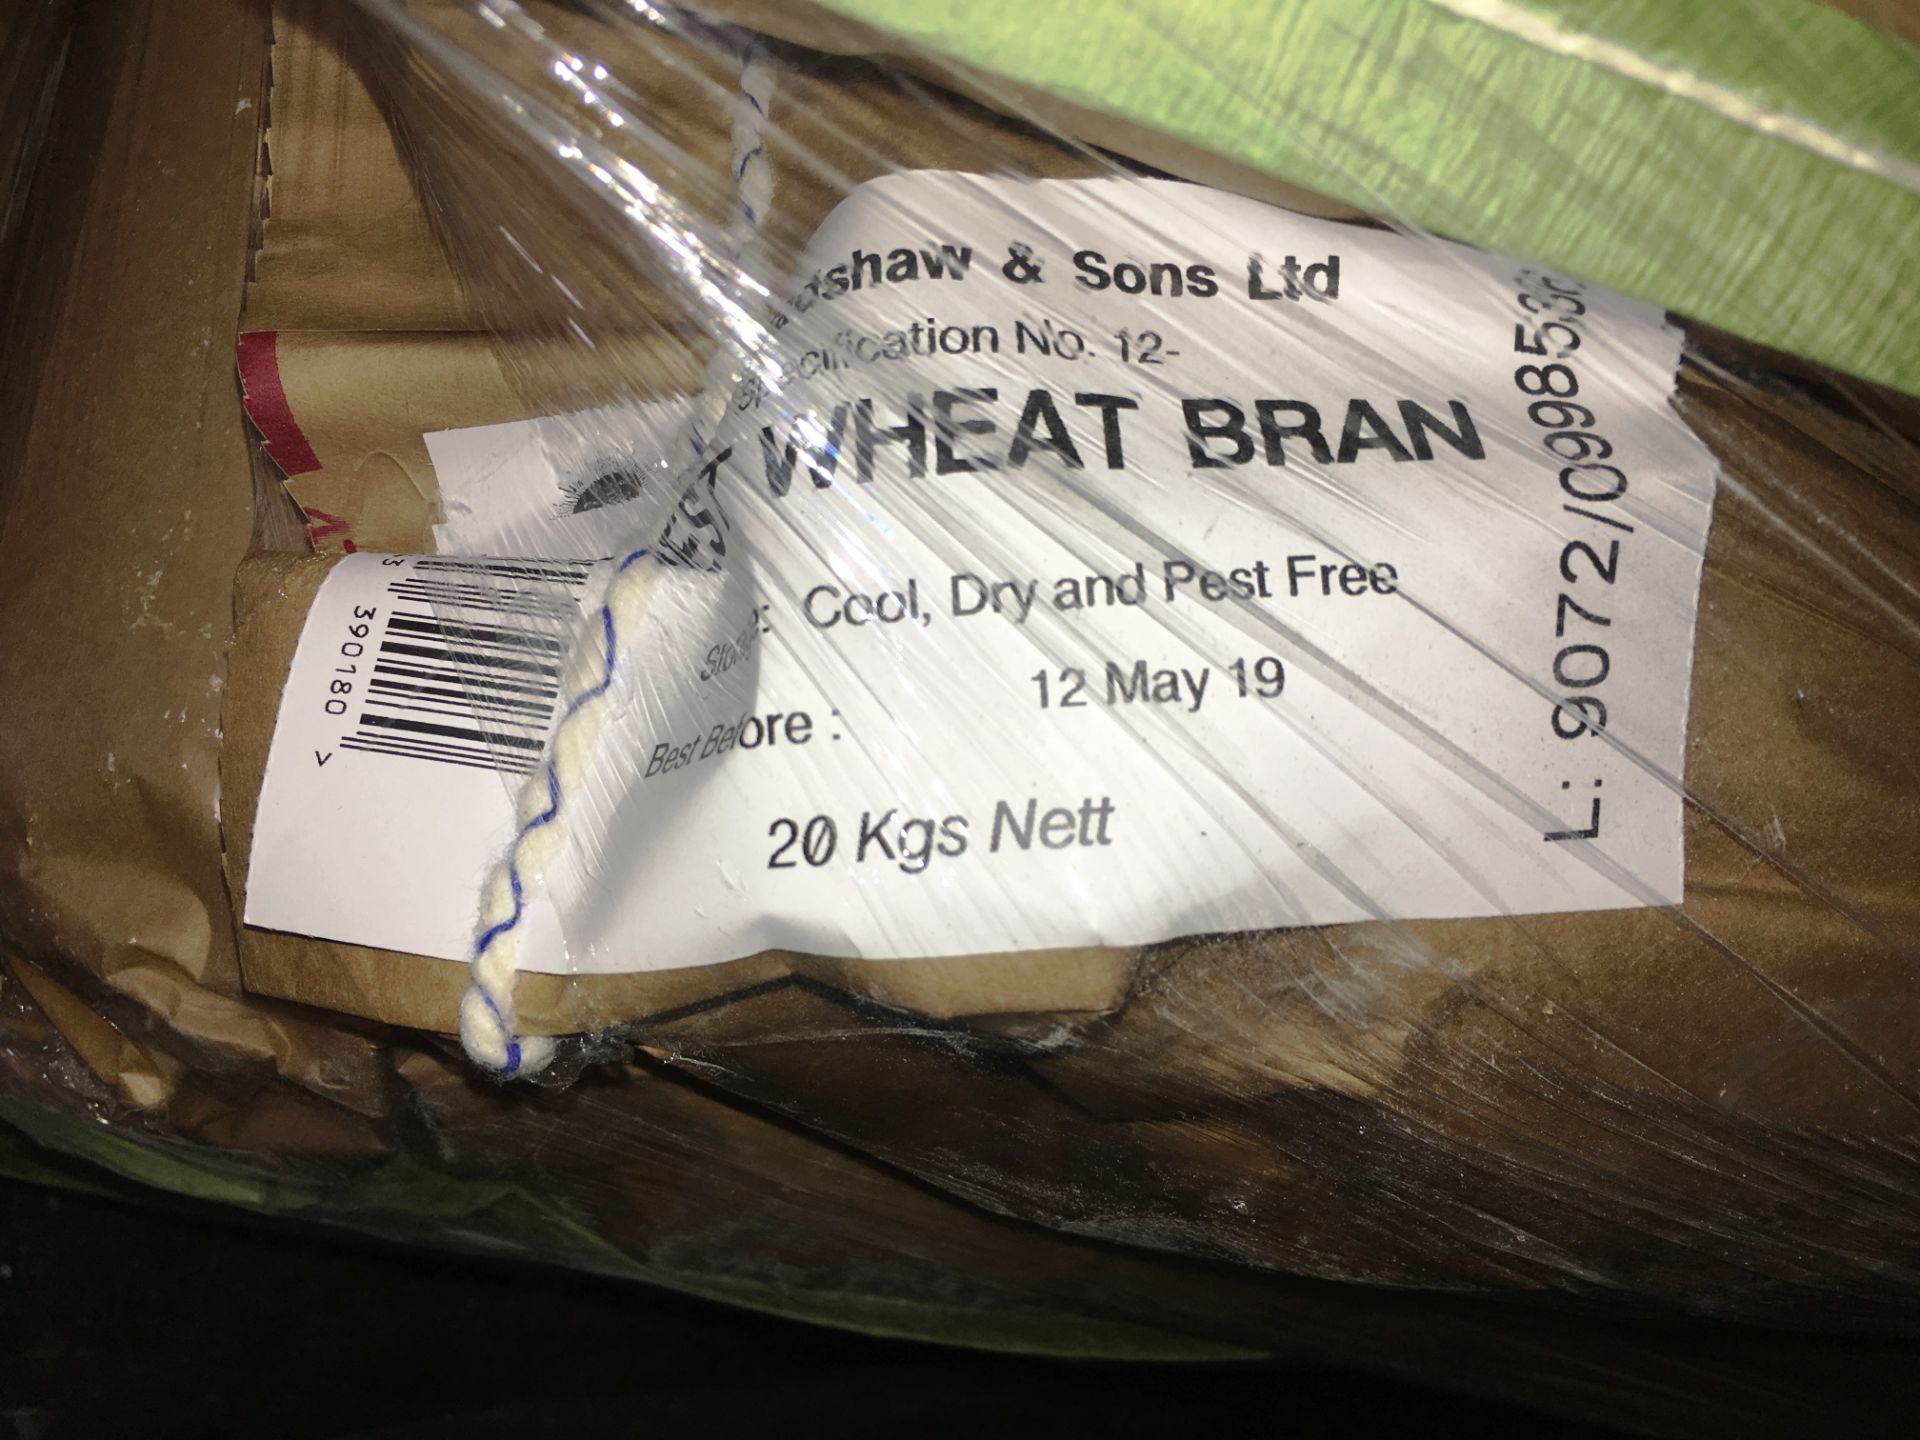 25 x 20kg Bags of Wheat Bran - PAST BEST BEFORE DATE - Image 2 of 3